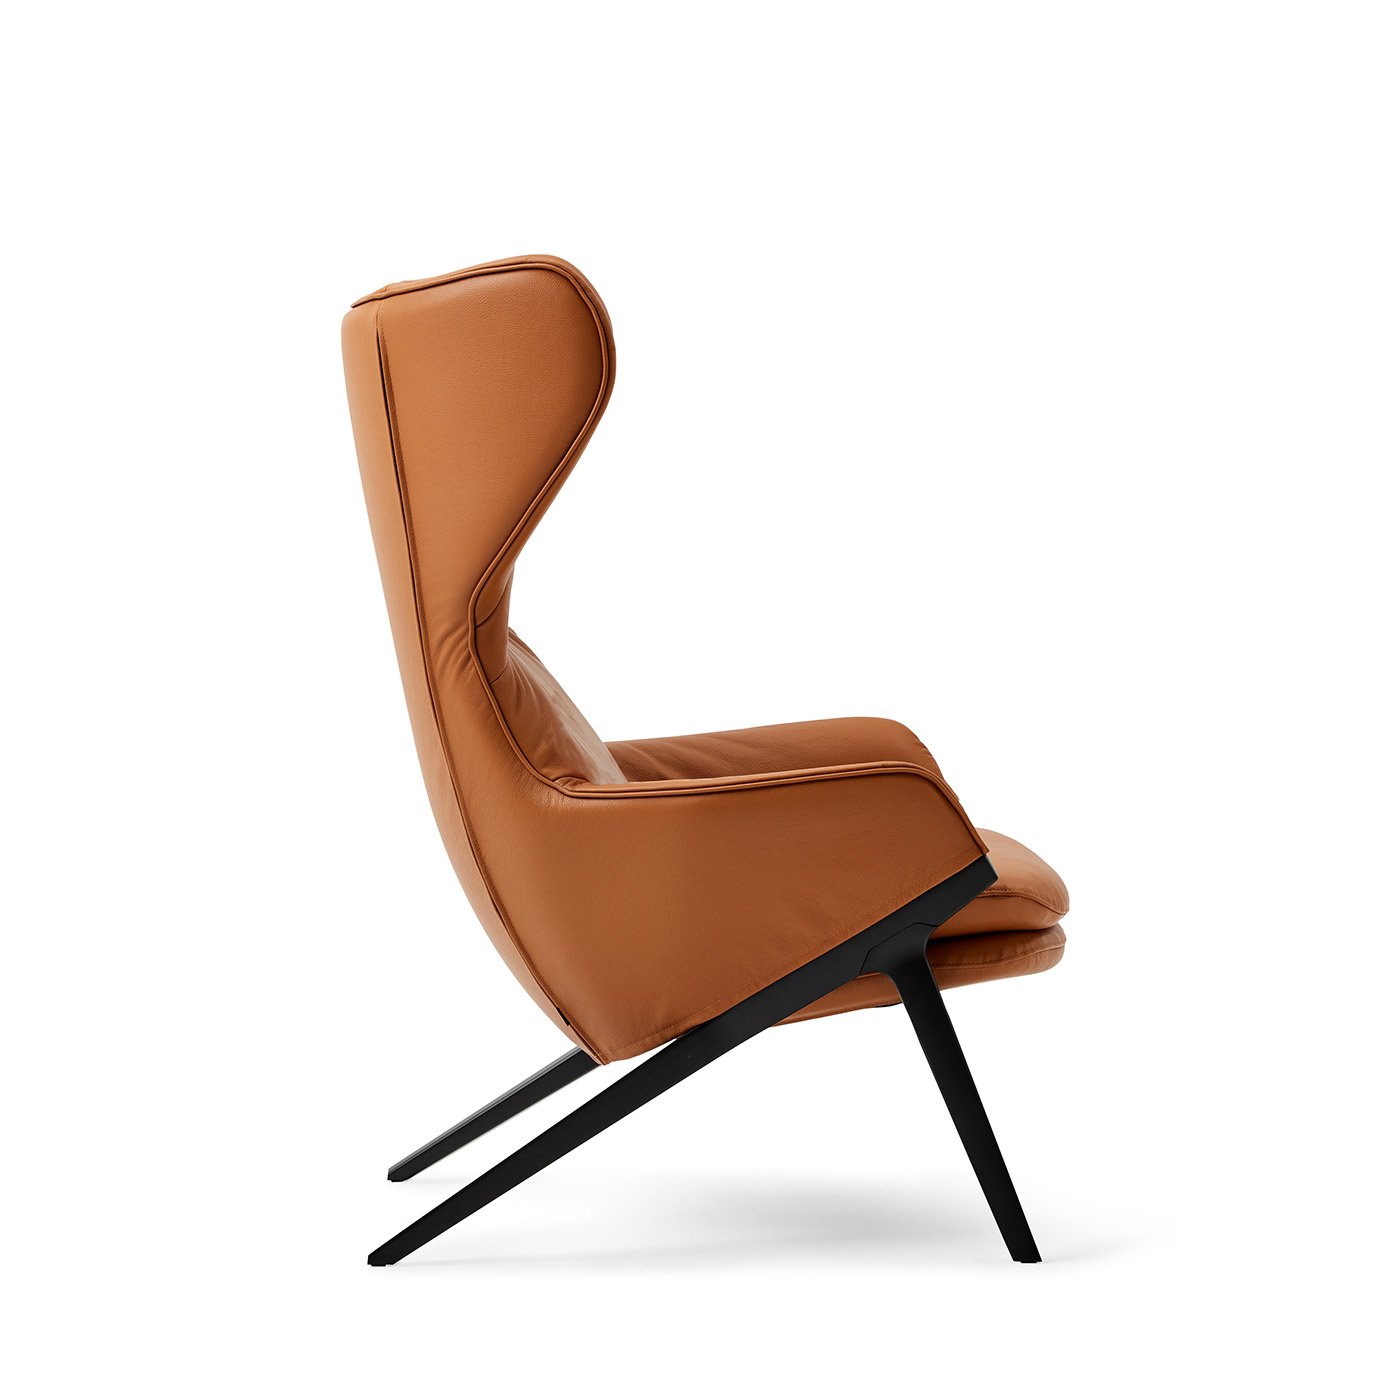 Detail side shot of the P22 Lounge chair in Ambra